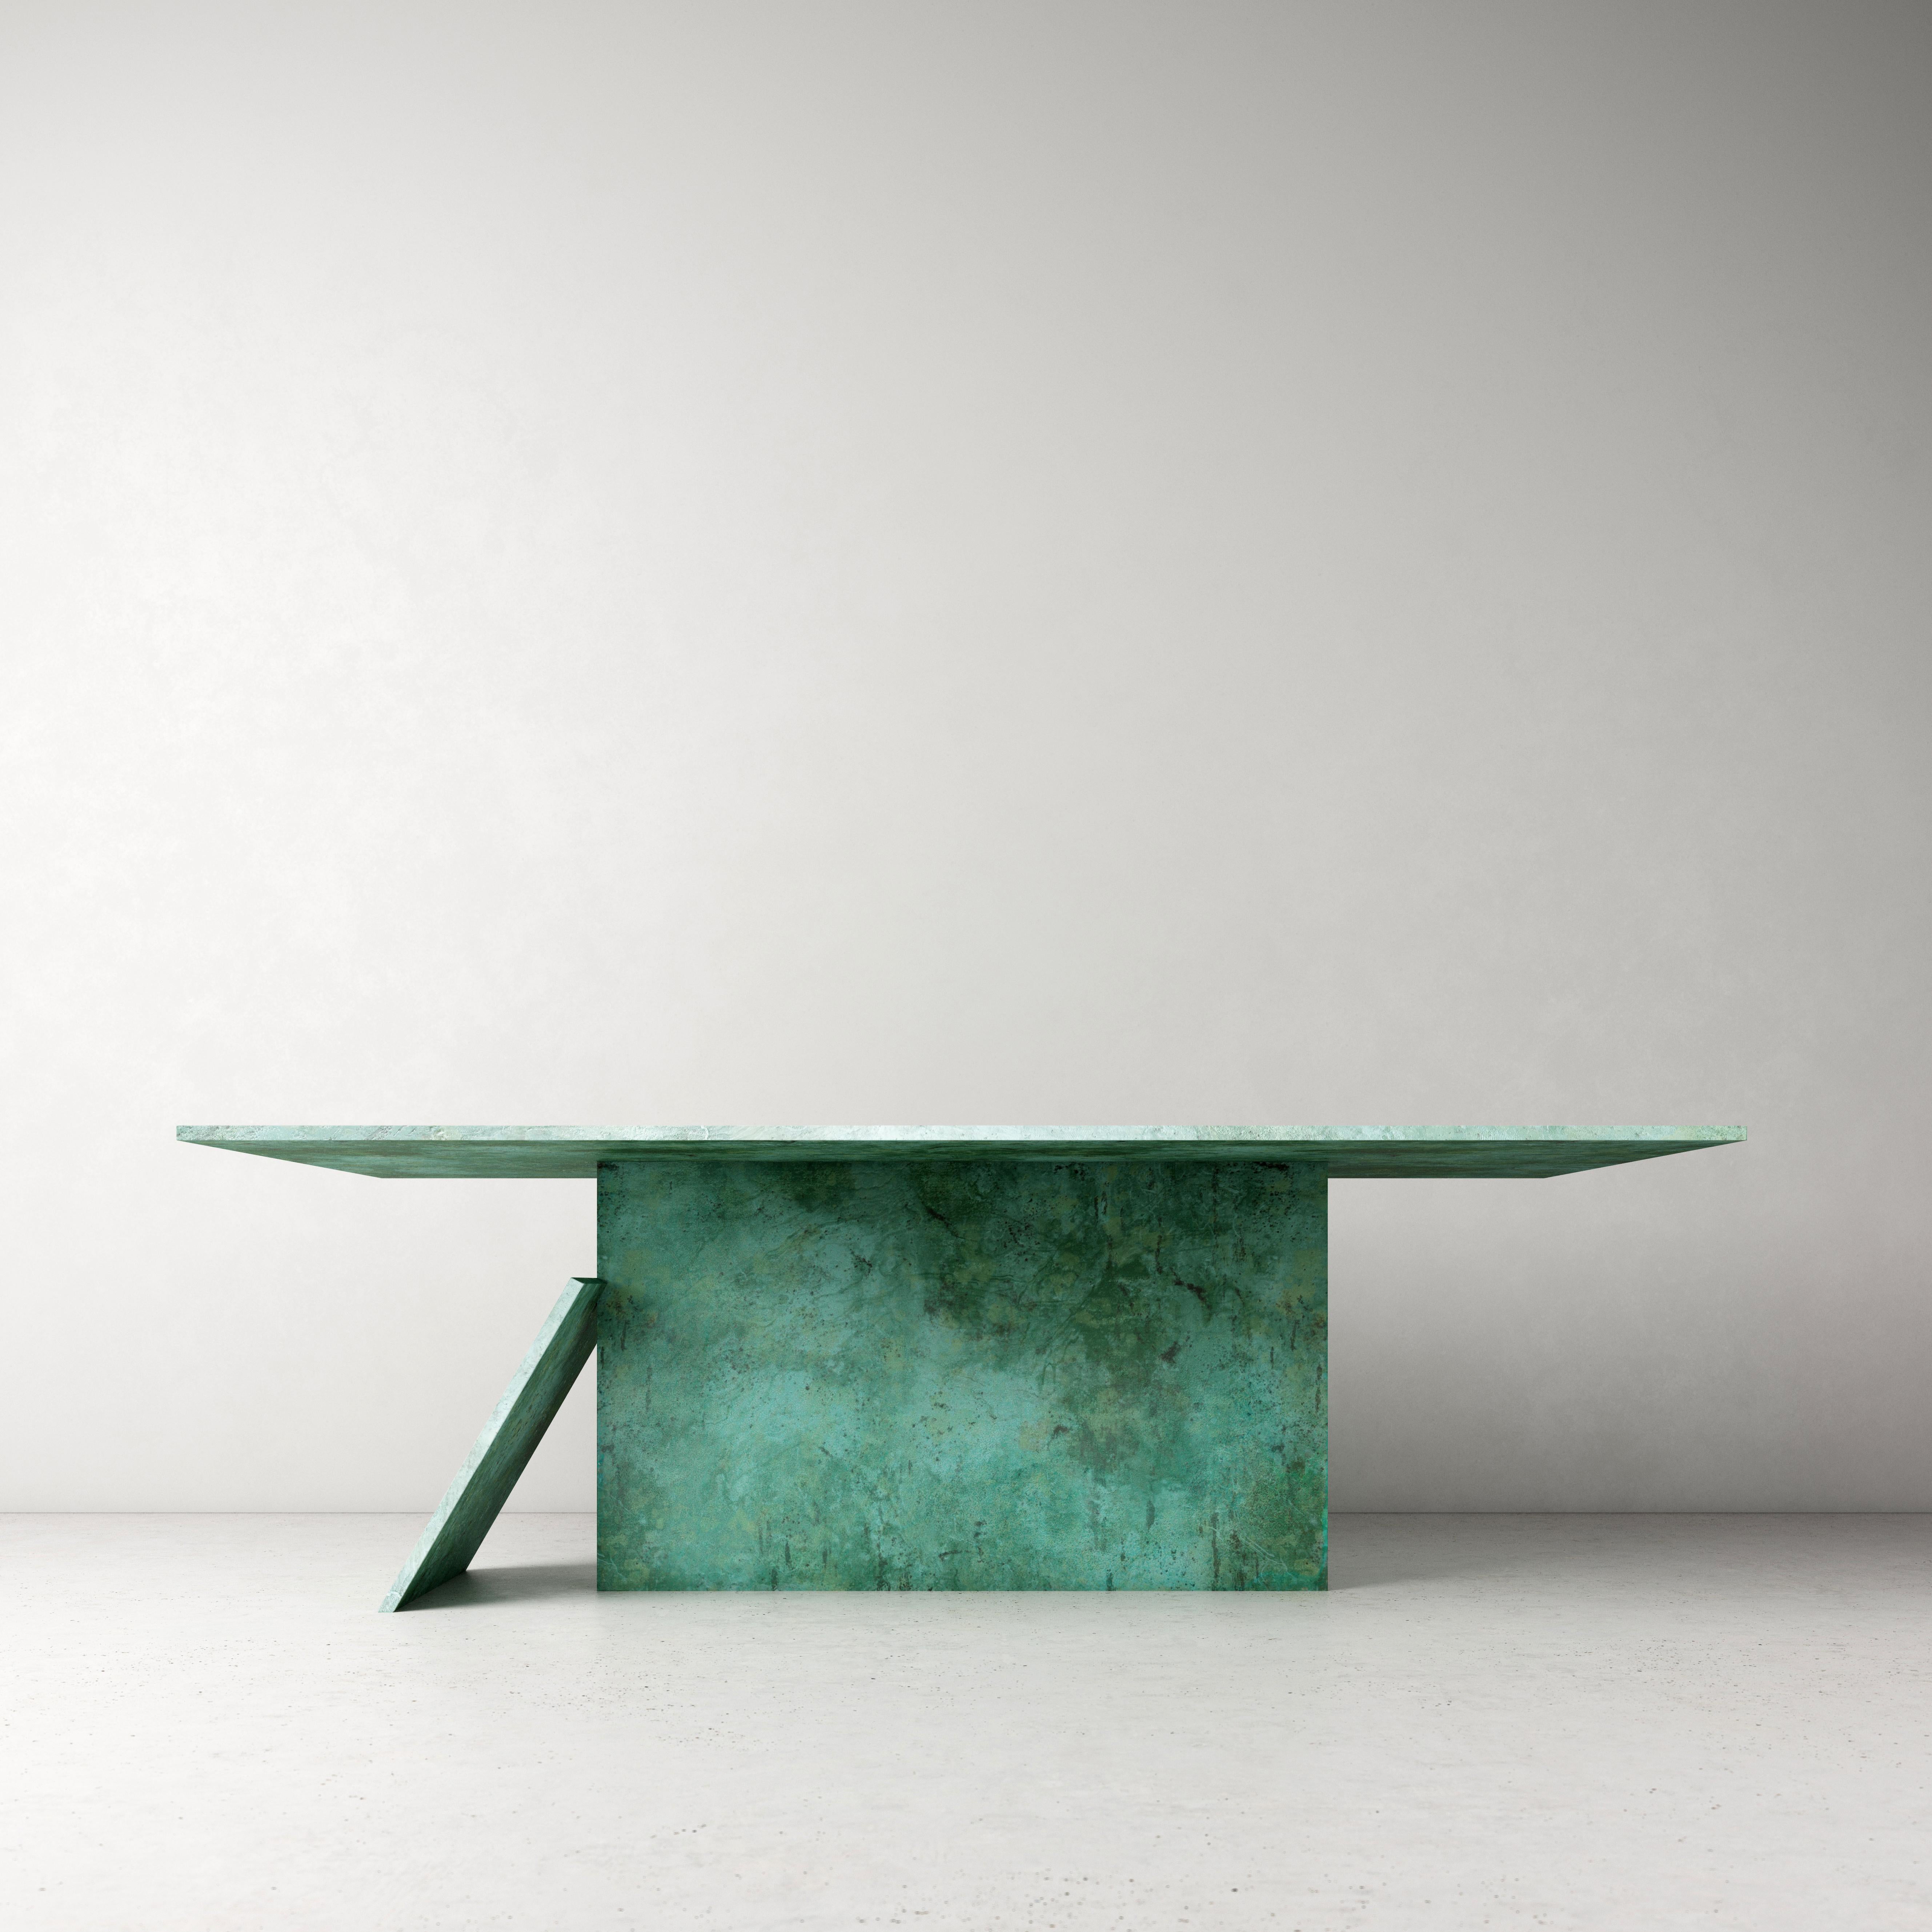 Contemporary table T by Dam Atelier.
Dimensions: L 220 x W 110 x H 73.
Materials: verdigris copper.
Also available in stainless steel.

Dam atelier is a duo of young Italian architects sharing the passion for design
and architecture, Paolo